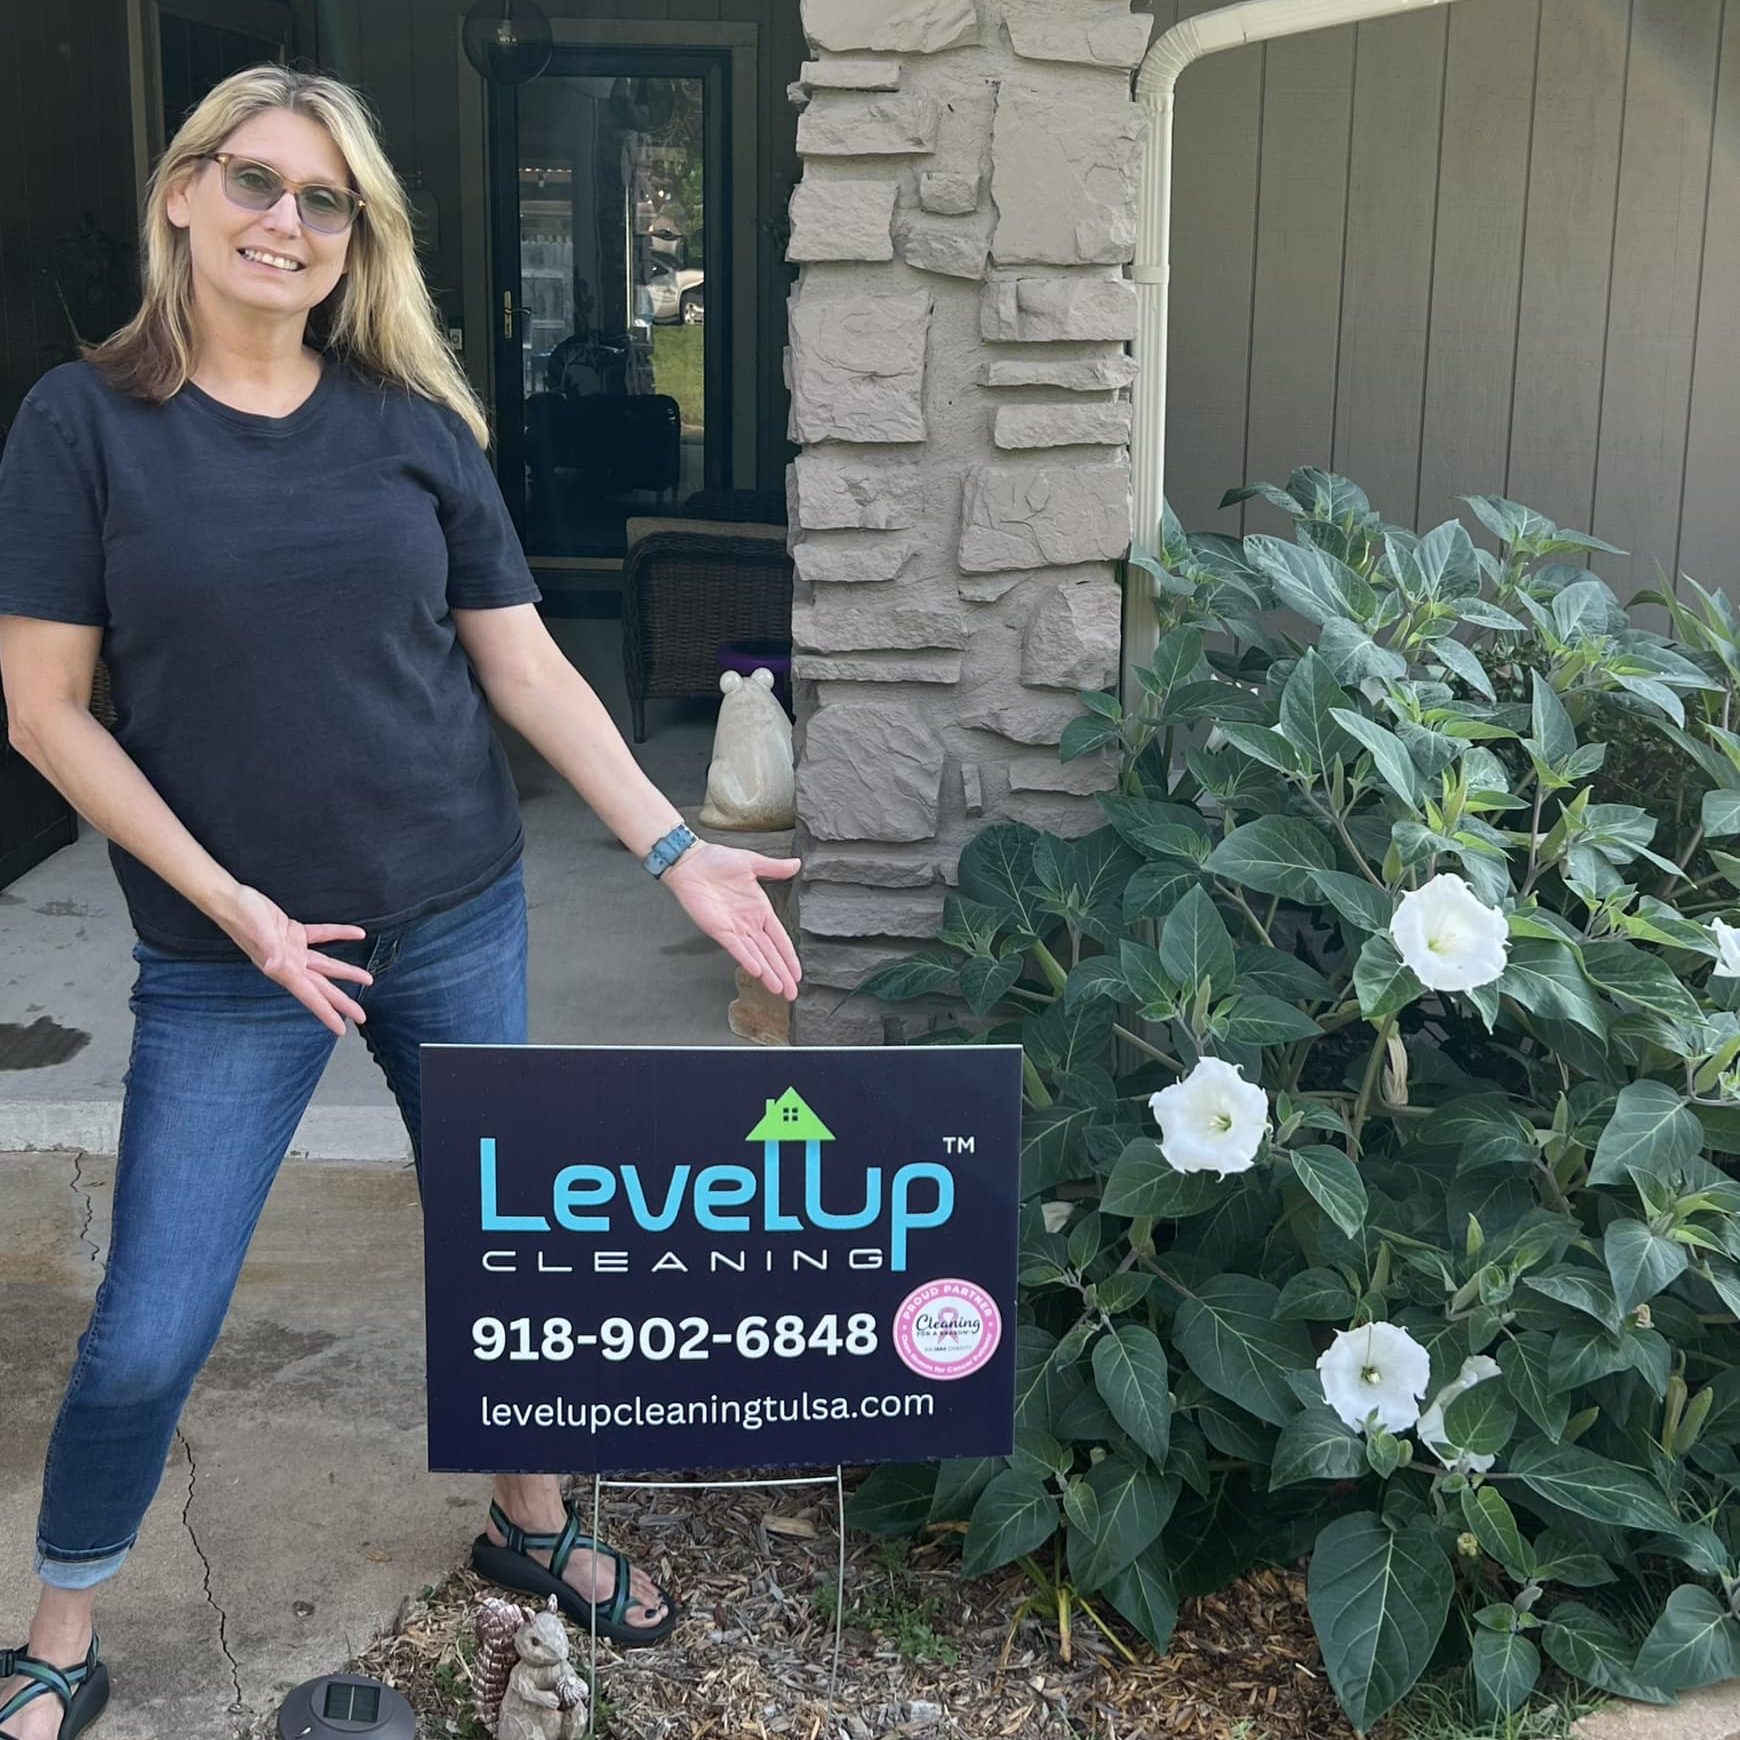 Owner of level up cleaning in tulsa